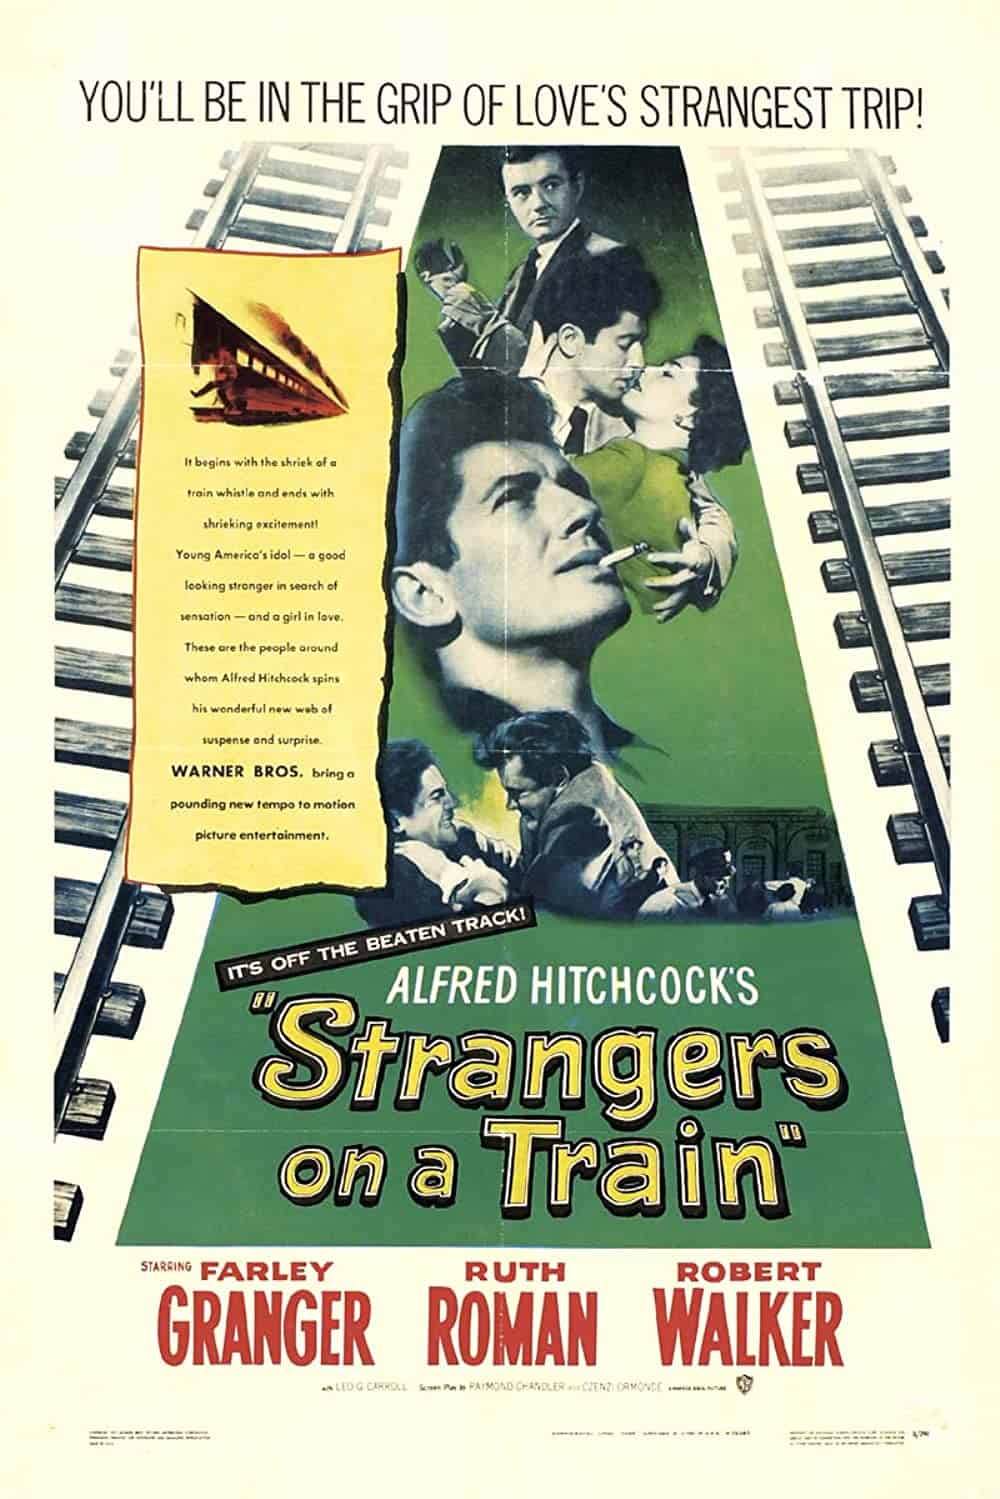 Strangers on a Train (1951) Best Train Movies You Can't Miss